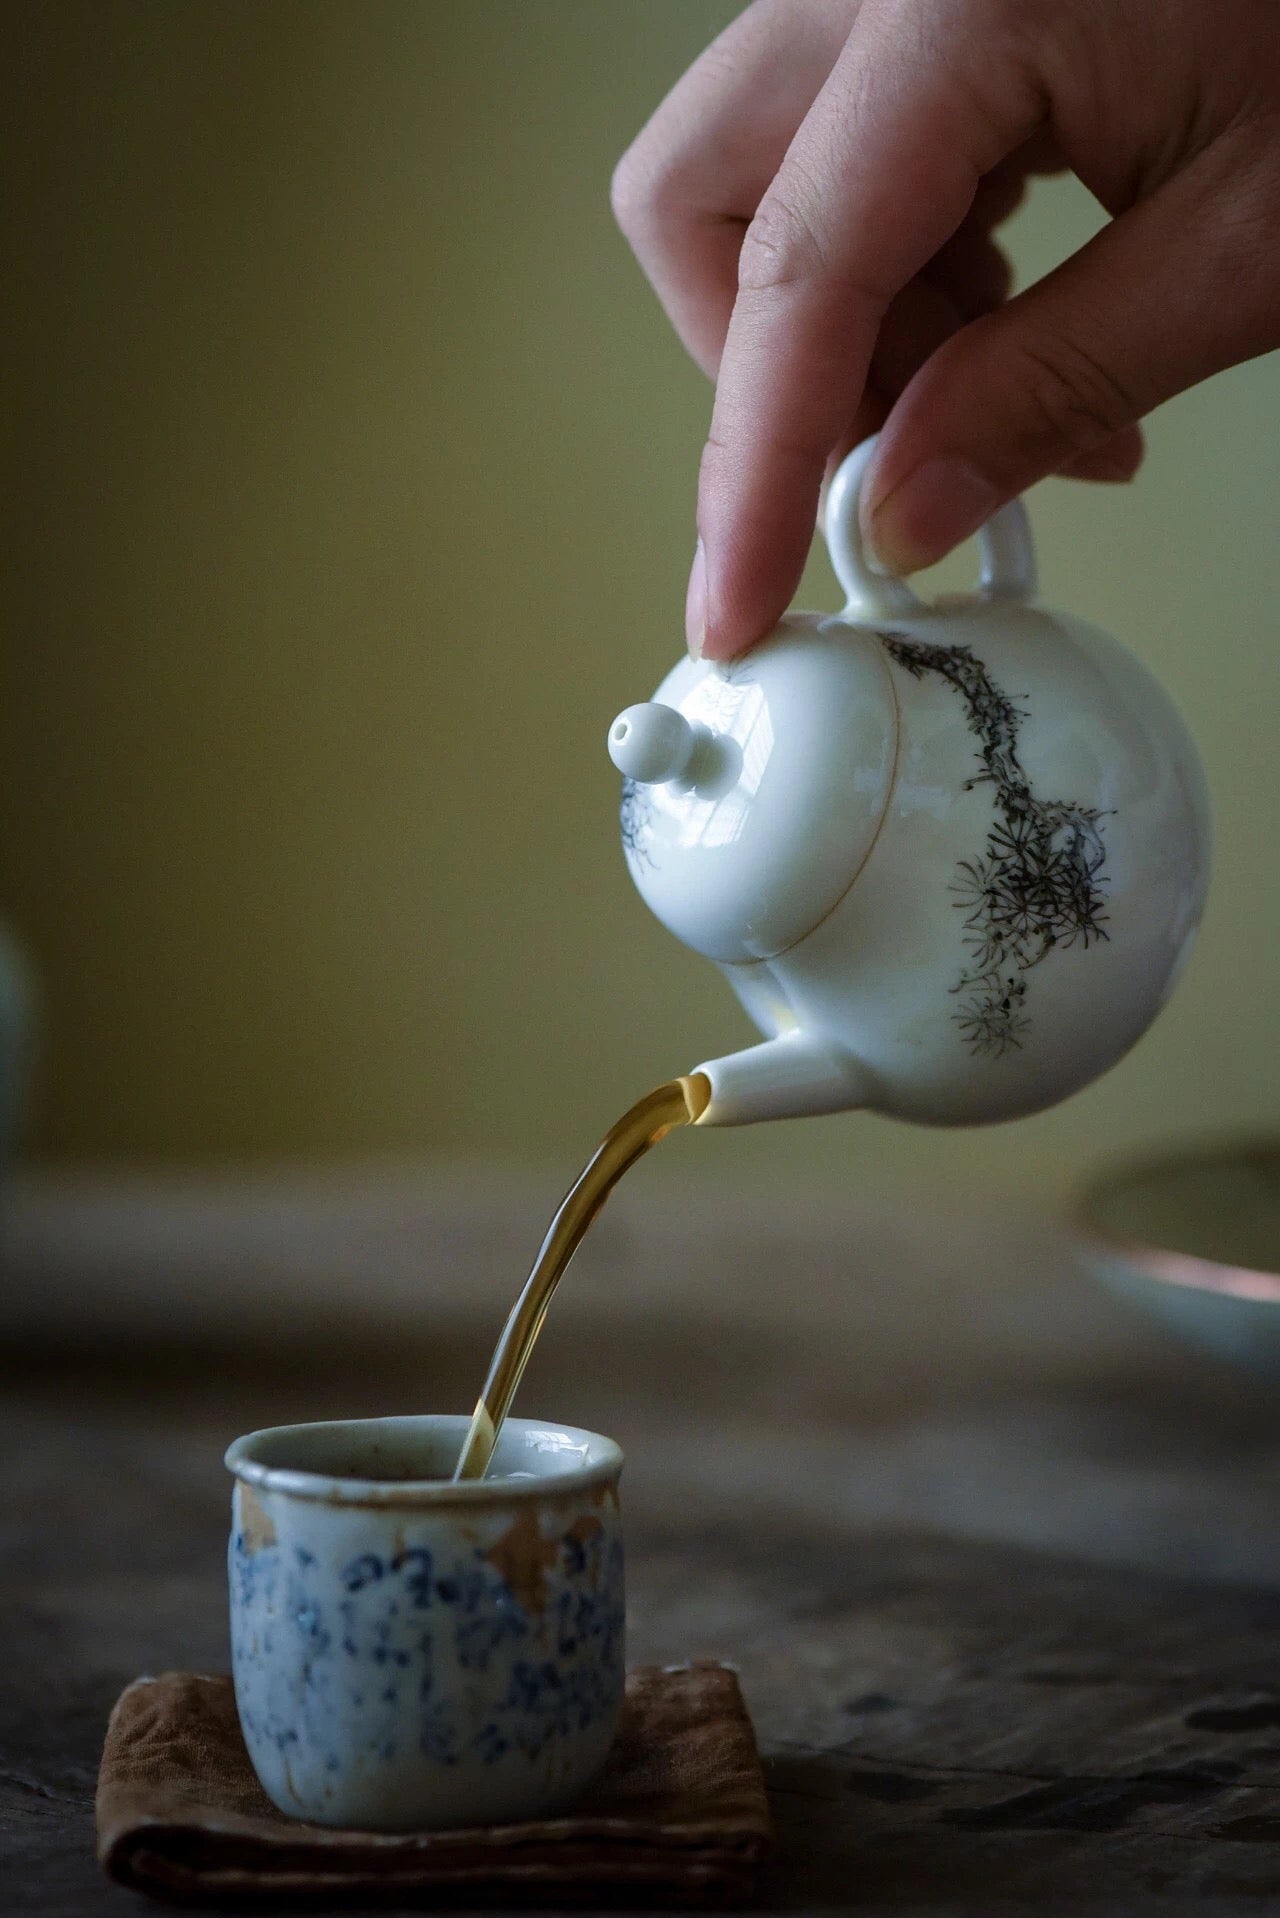 Teapot With Chinese Ink of Pine Tree Lovely Tea Ware|Best Ceramics